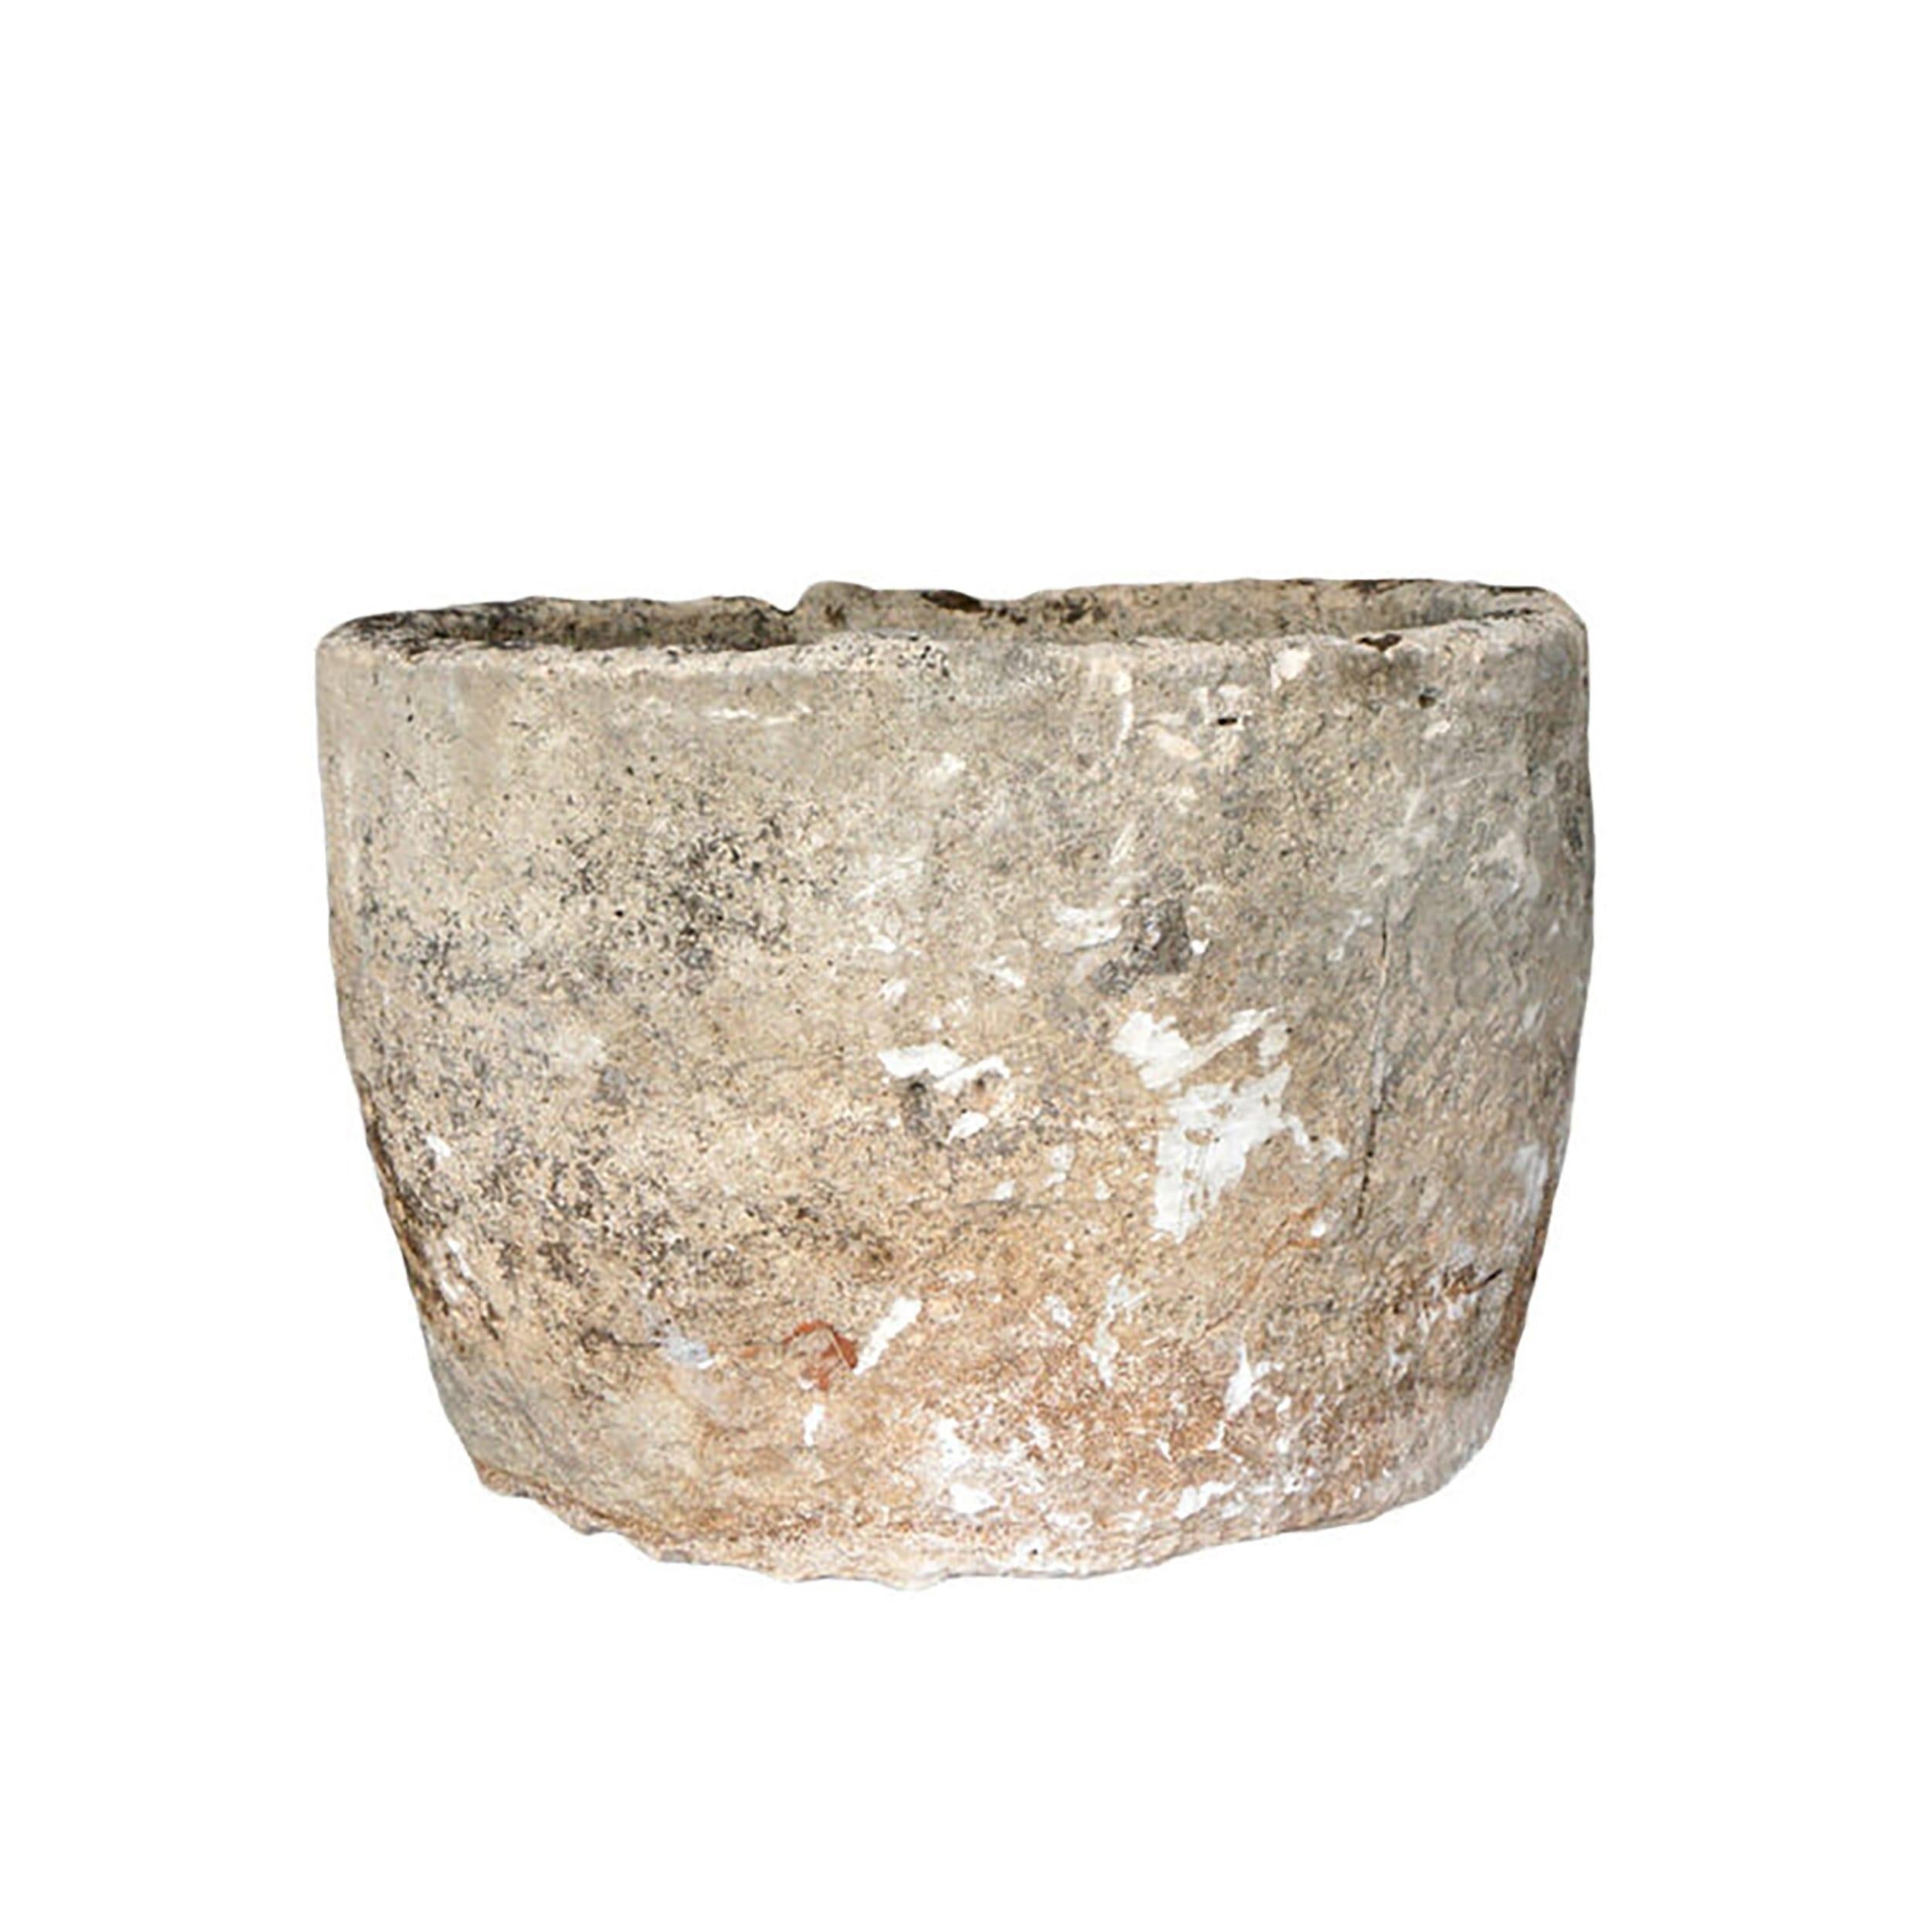 Transport your garden to the romantic allure of old French estates with these exquisite antique stone repurposed and hand carved to use as a planter. Each one boasts a distinguished aged patina and a unique elegant weathered surface. The weathered